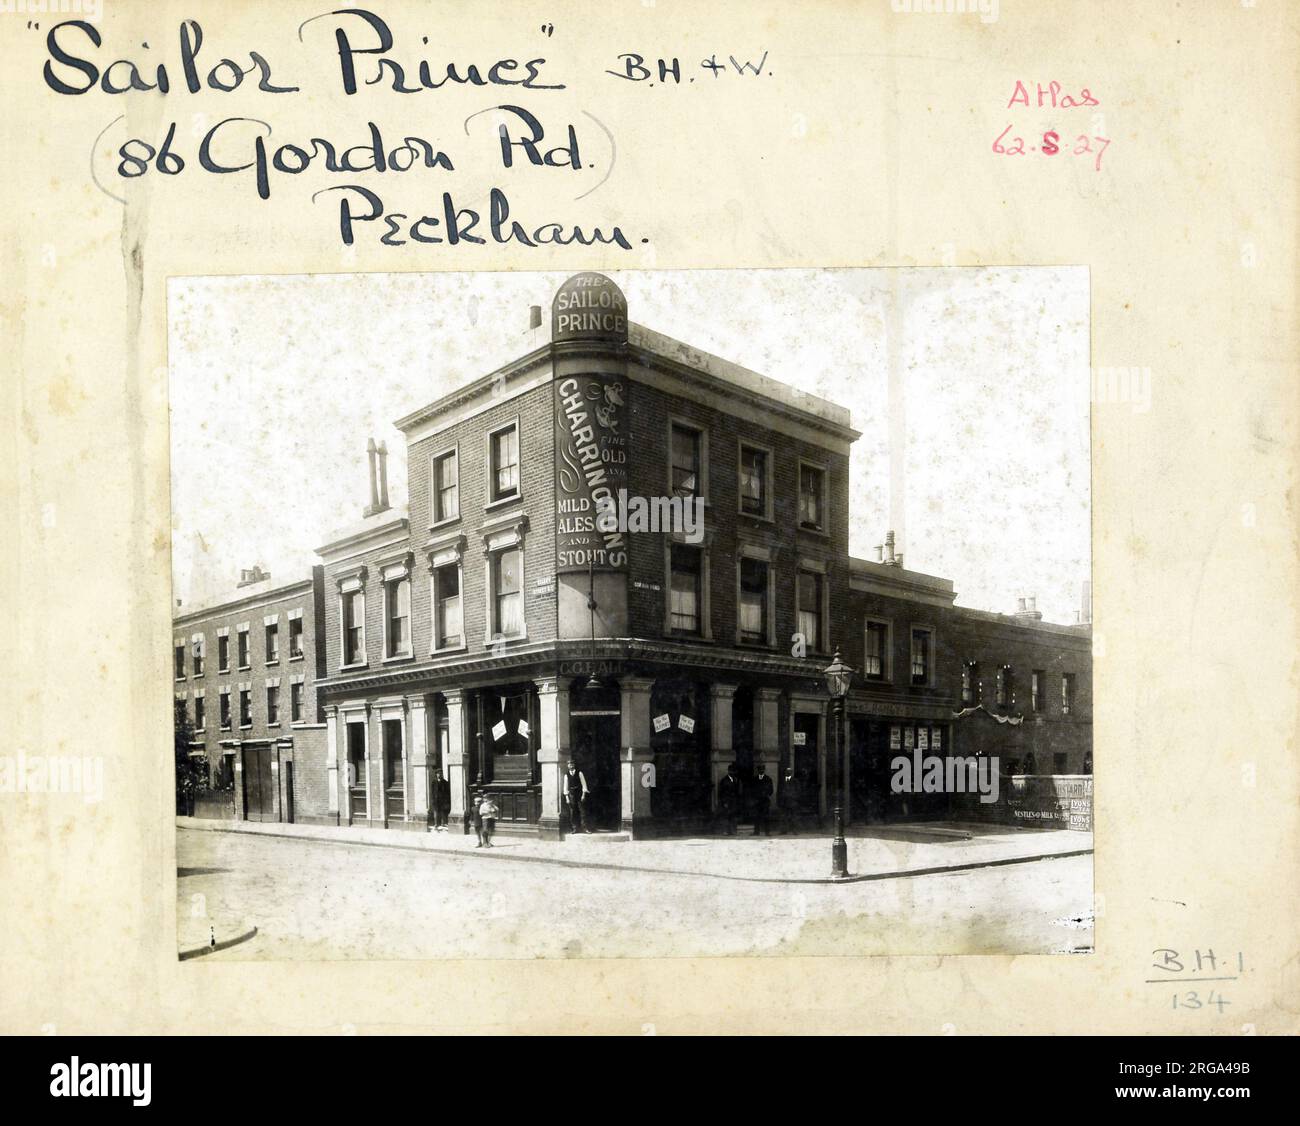 Photograph of Sailor Prince PH, Peckham, London. The main side of the print (shown here) depicts: Corner on view of the pub.  The back of the print (available on request) details: Trading Record 1913 . 1931 for the Sailor Prince, Peckham, London SE15 3RG. As of July 2018 . Converted to residential use by March 2011. Stock Photo